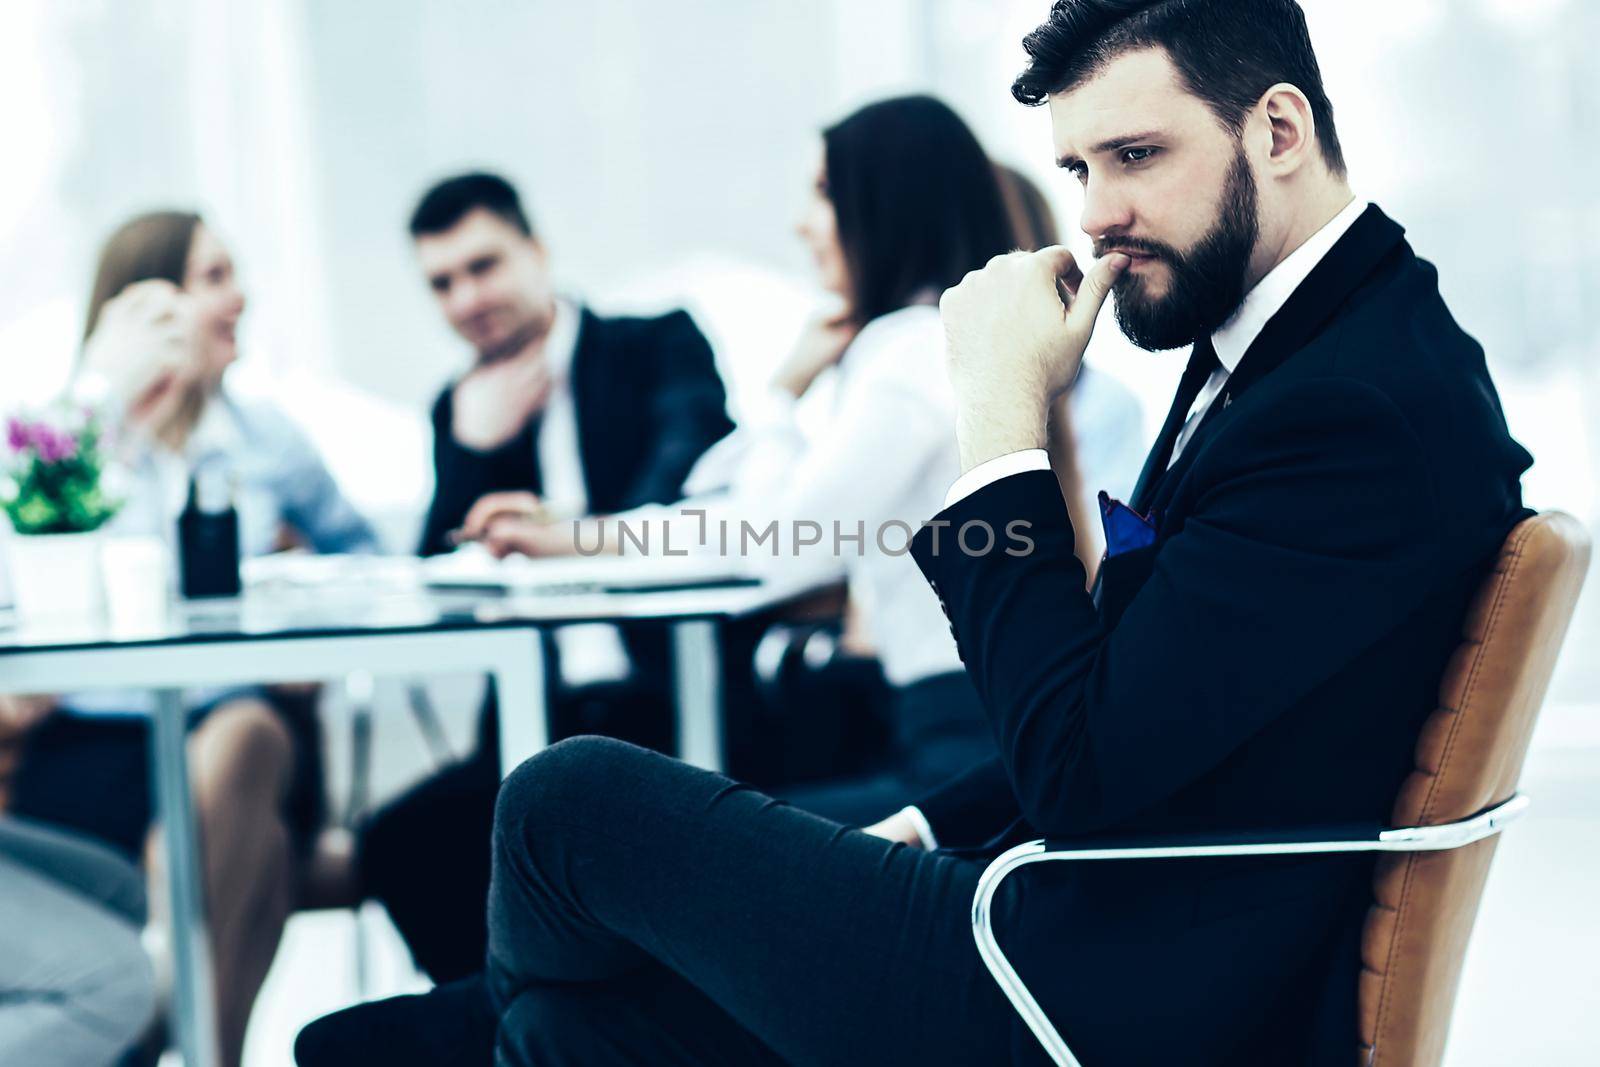 financial Manager of the company on the background of the working meeting the business team.the photo has a empty space for your text